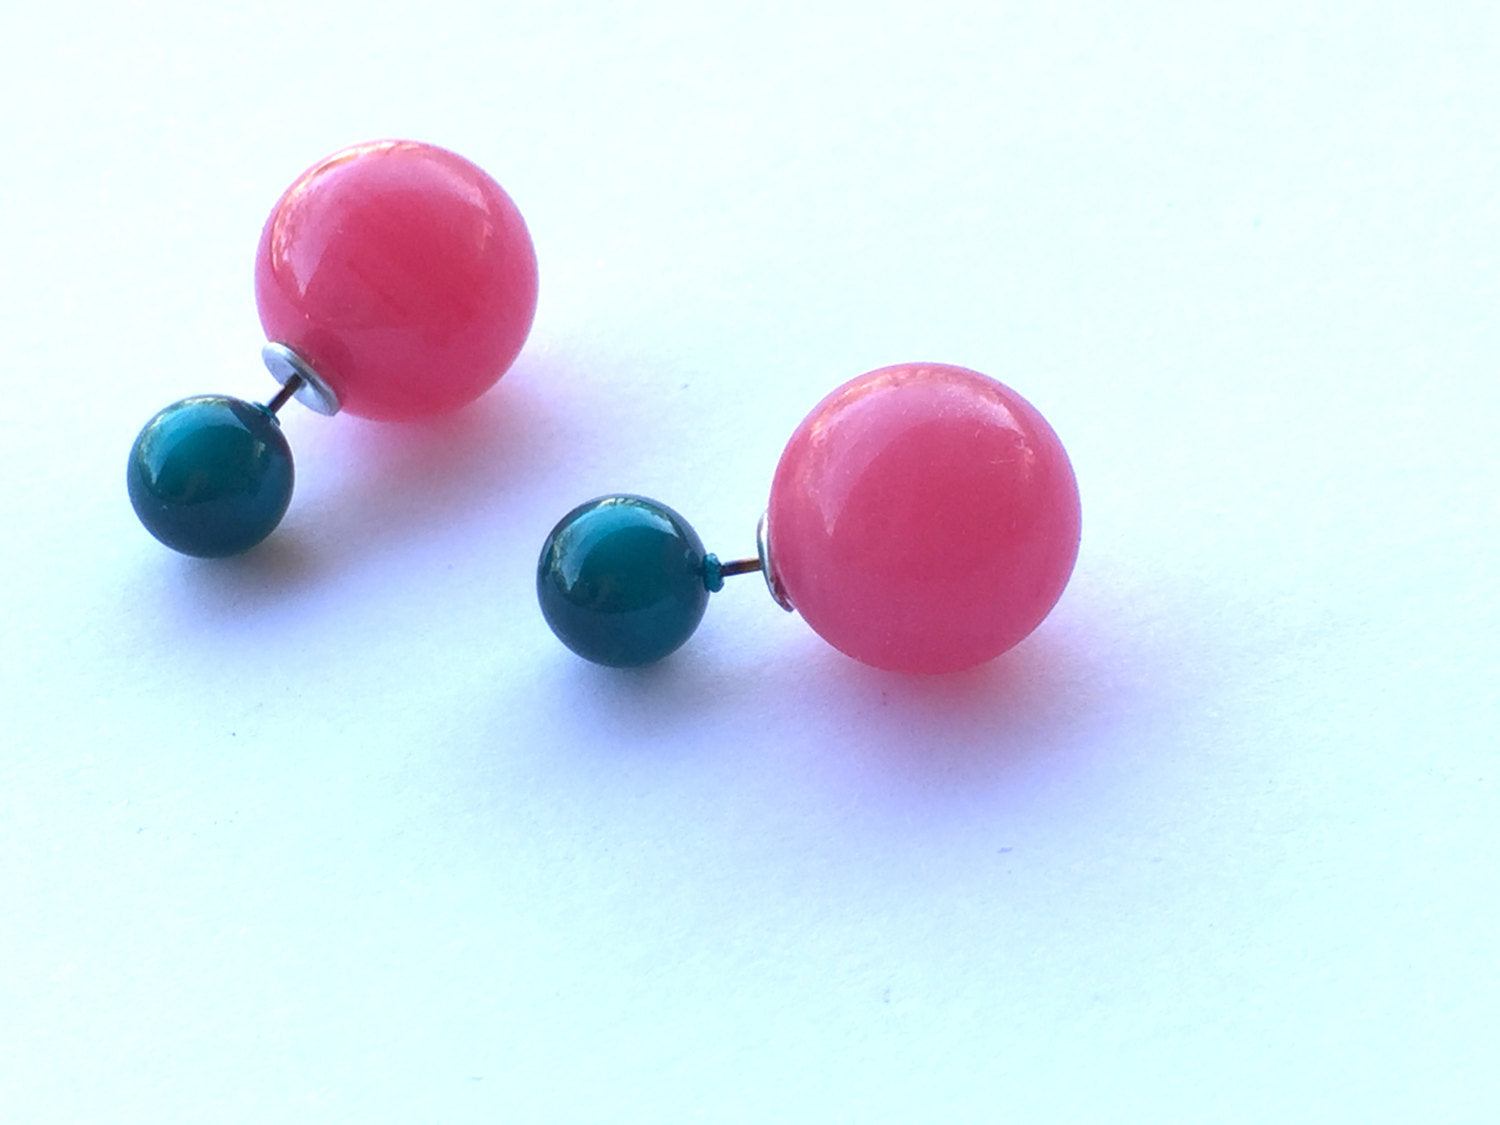 Deep Teal Green with Fuchsia Pink 2 Sided Stud Earrings